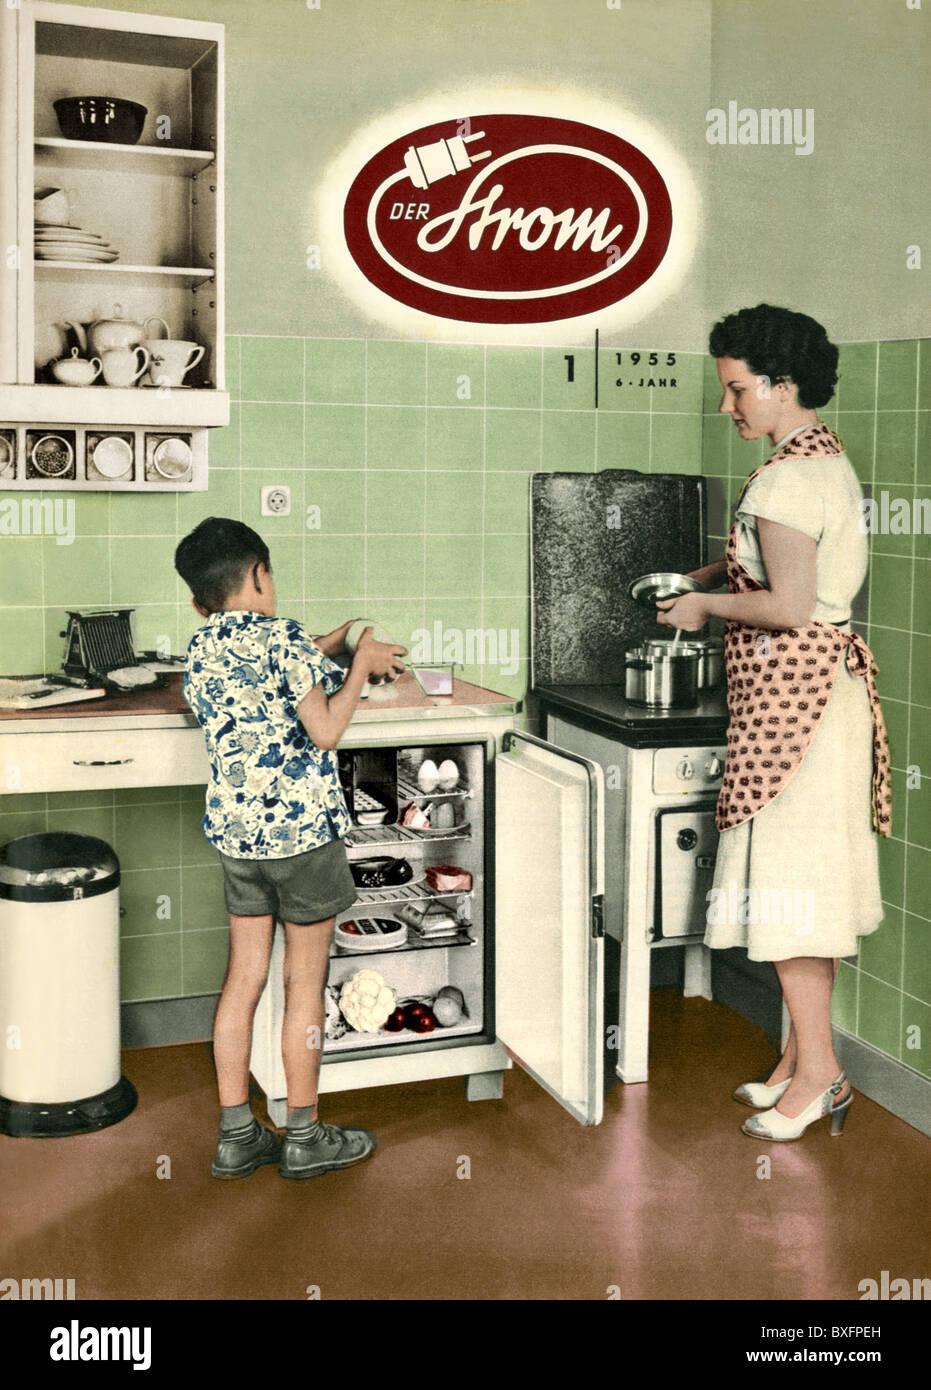 household, kitchen and kitchenware, refrigerator and electric cooker, cover of the German magazine 'Der Strom' (The Current), customer magazine of the electricity suppliers, Vol. 6, No. 1, 1955, Additional-Rights-Clearences-Not Available Stock Photo